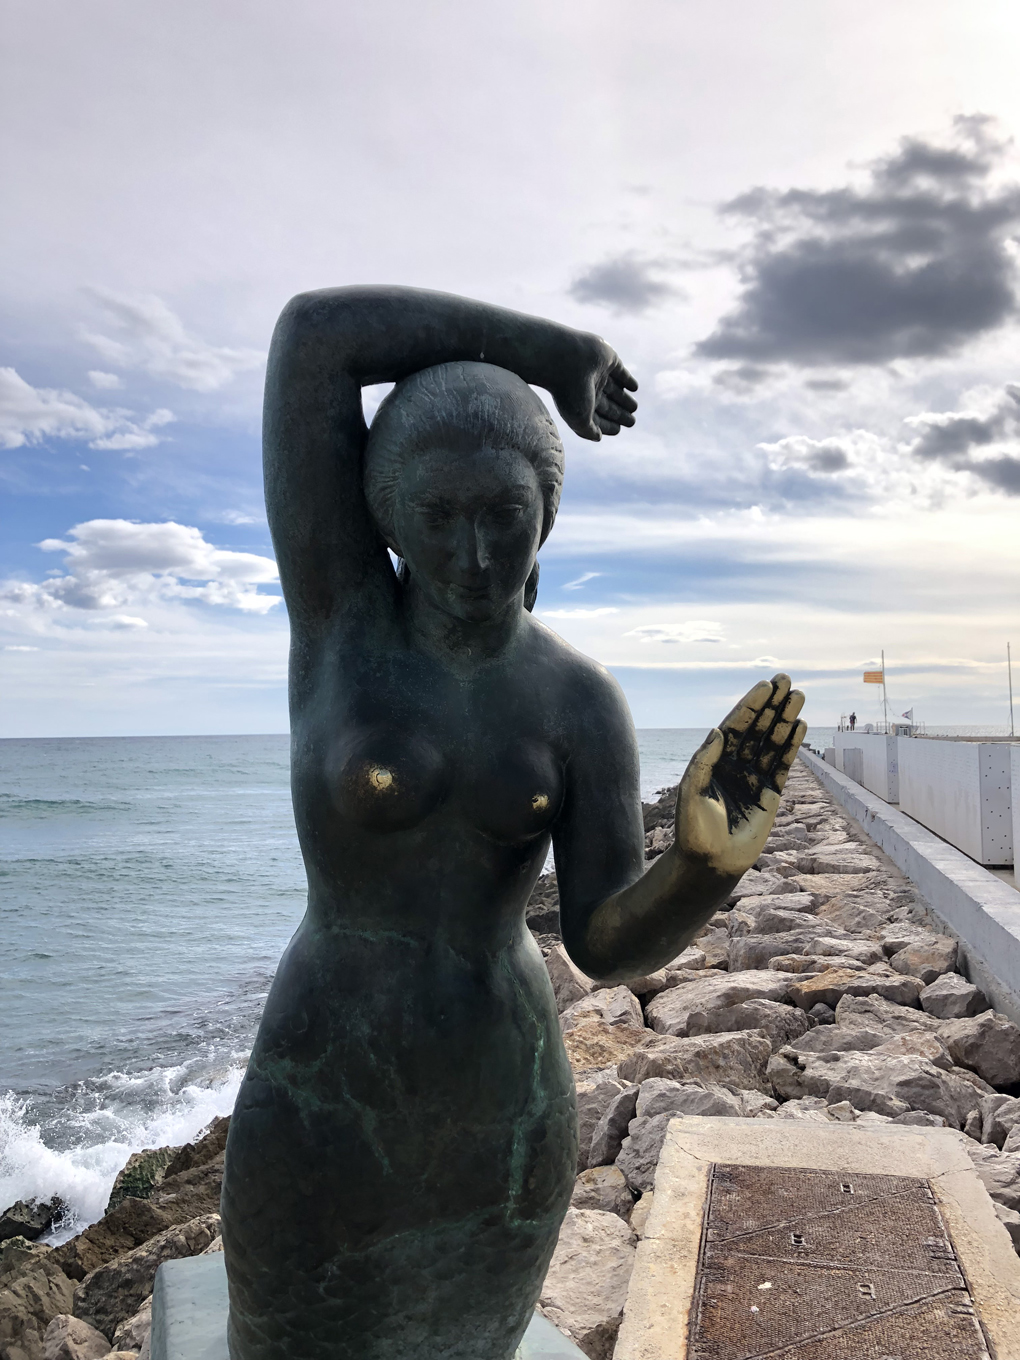 A bronze statue of a mermaid against the backdrop of the Mediterranean, with her left palm held forward.